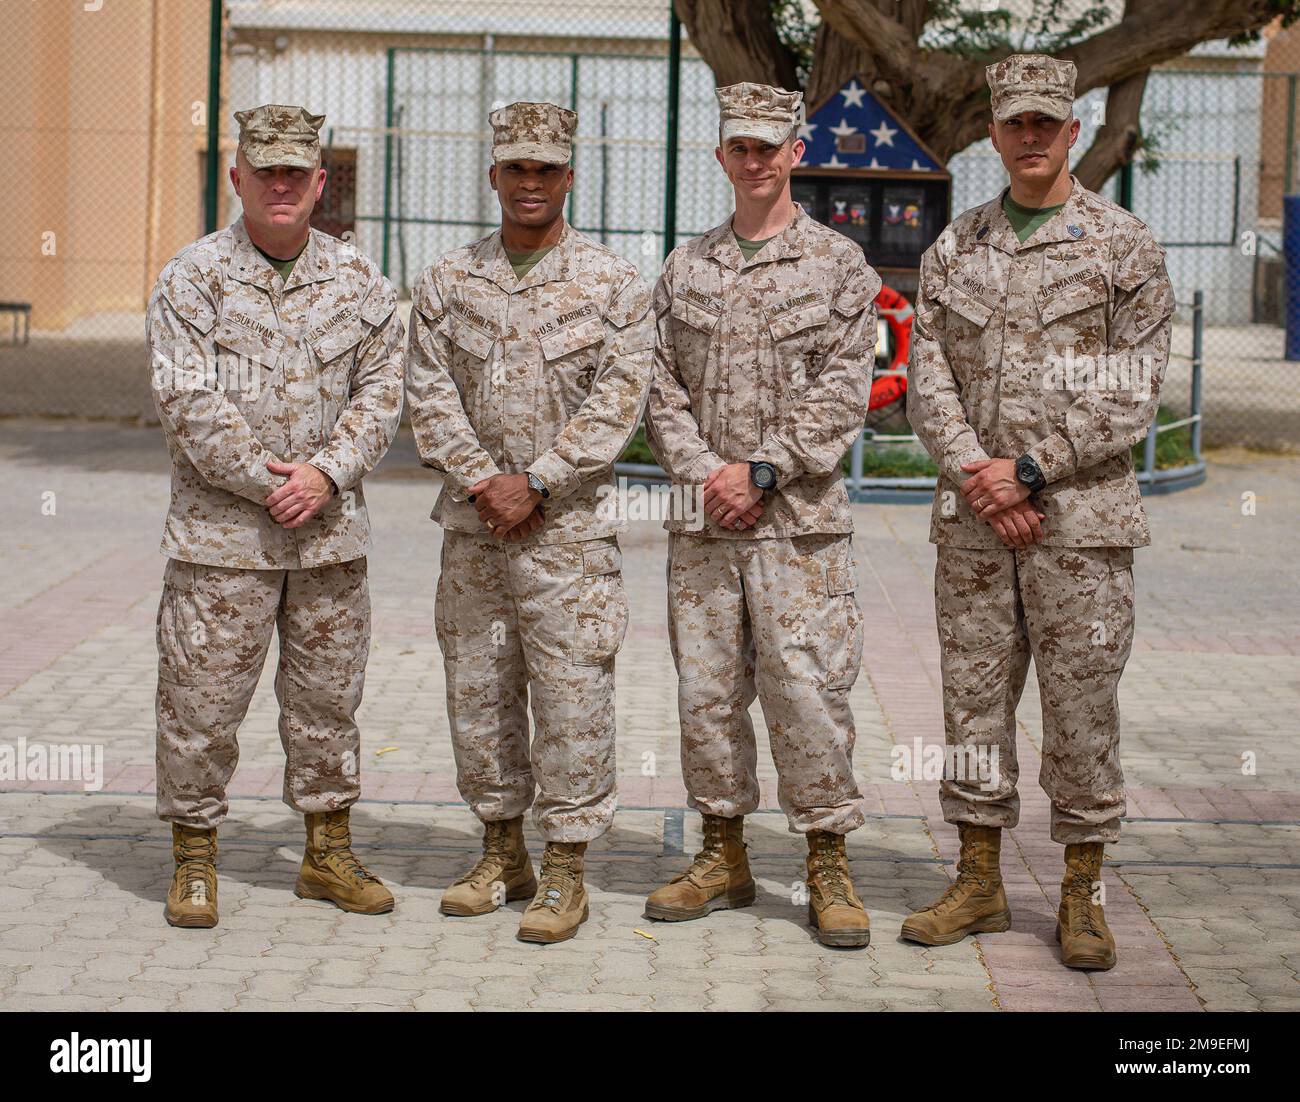 NAVAL SUPPORT ACTIVITY, Bahrain (May19, 2022) - Marine Brig. General Farrell Sullivan, the Commanding General of Task Force 51/5th Marine Expeditionary Brigade (TF 51/5), far left, Maj. Tracey Holtshirley, the incoming Commanding Officer of TF 51/5 Headquarters Company (HQ Co.), left, Maj. Alexander Godbey, the outgoing Commanding Officer of TF 51/5 HQ Co., right, and Sgt. Maj. Rafael Vargas, The Sergeant Major of TF 51/5, far right, pose for a picture after the TF 51/5 HQ Co. change of command ceremony aboard Naval Support Activity Bahrain, May 19. During the ceremony, Godbey relinquished com Stock Photo